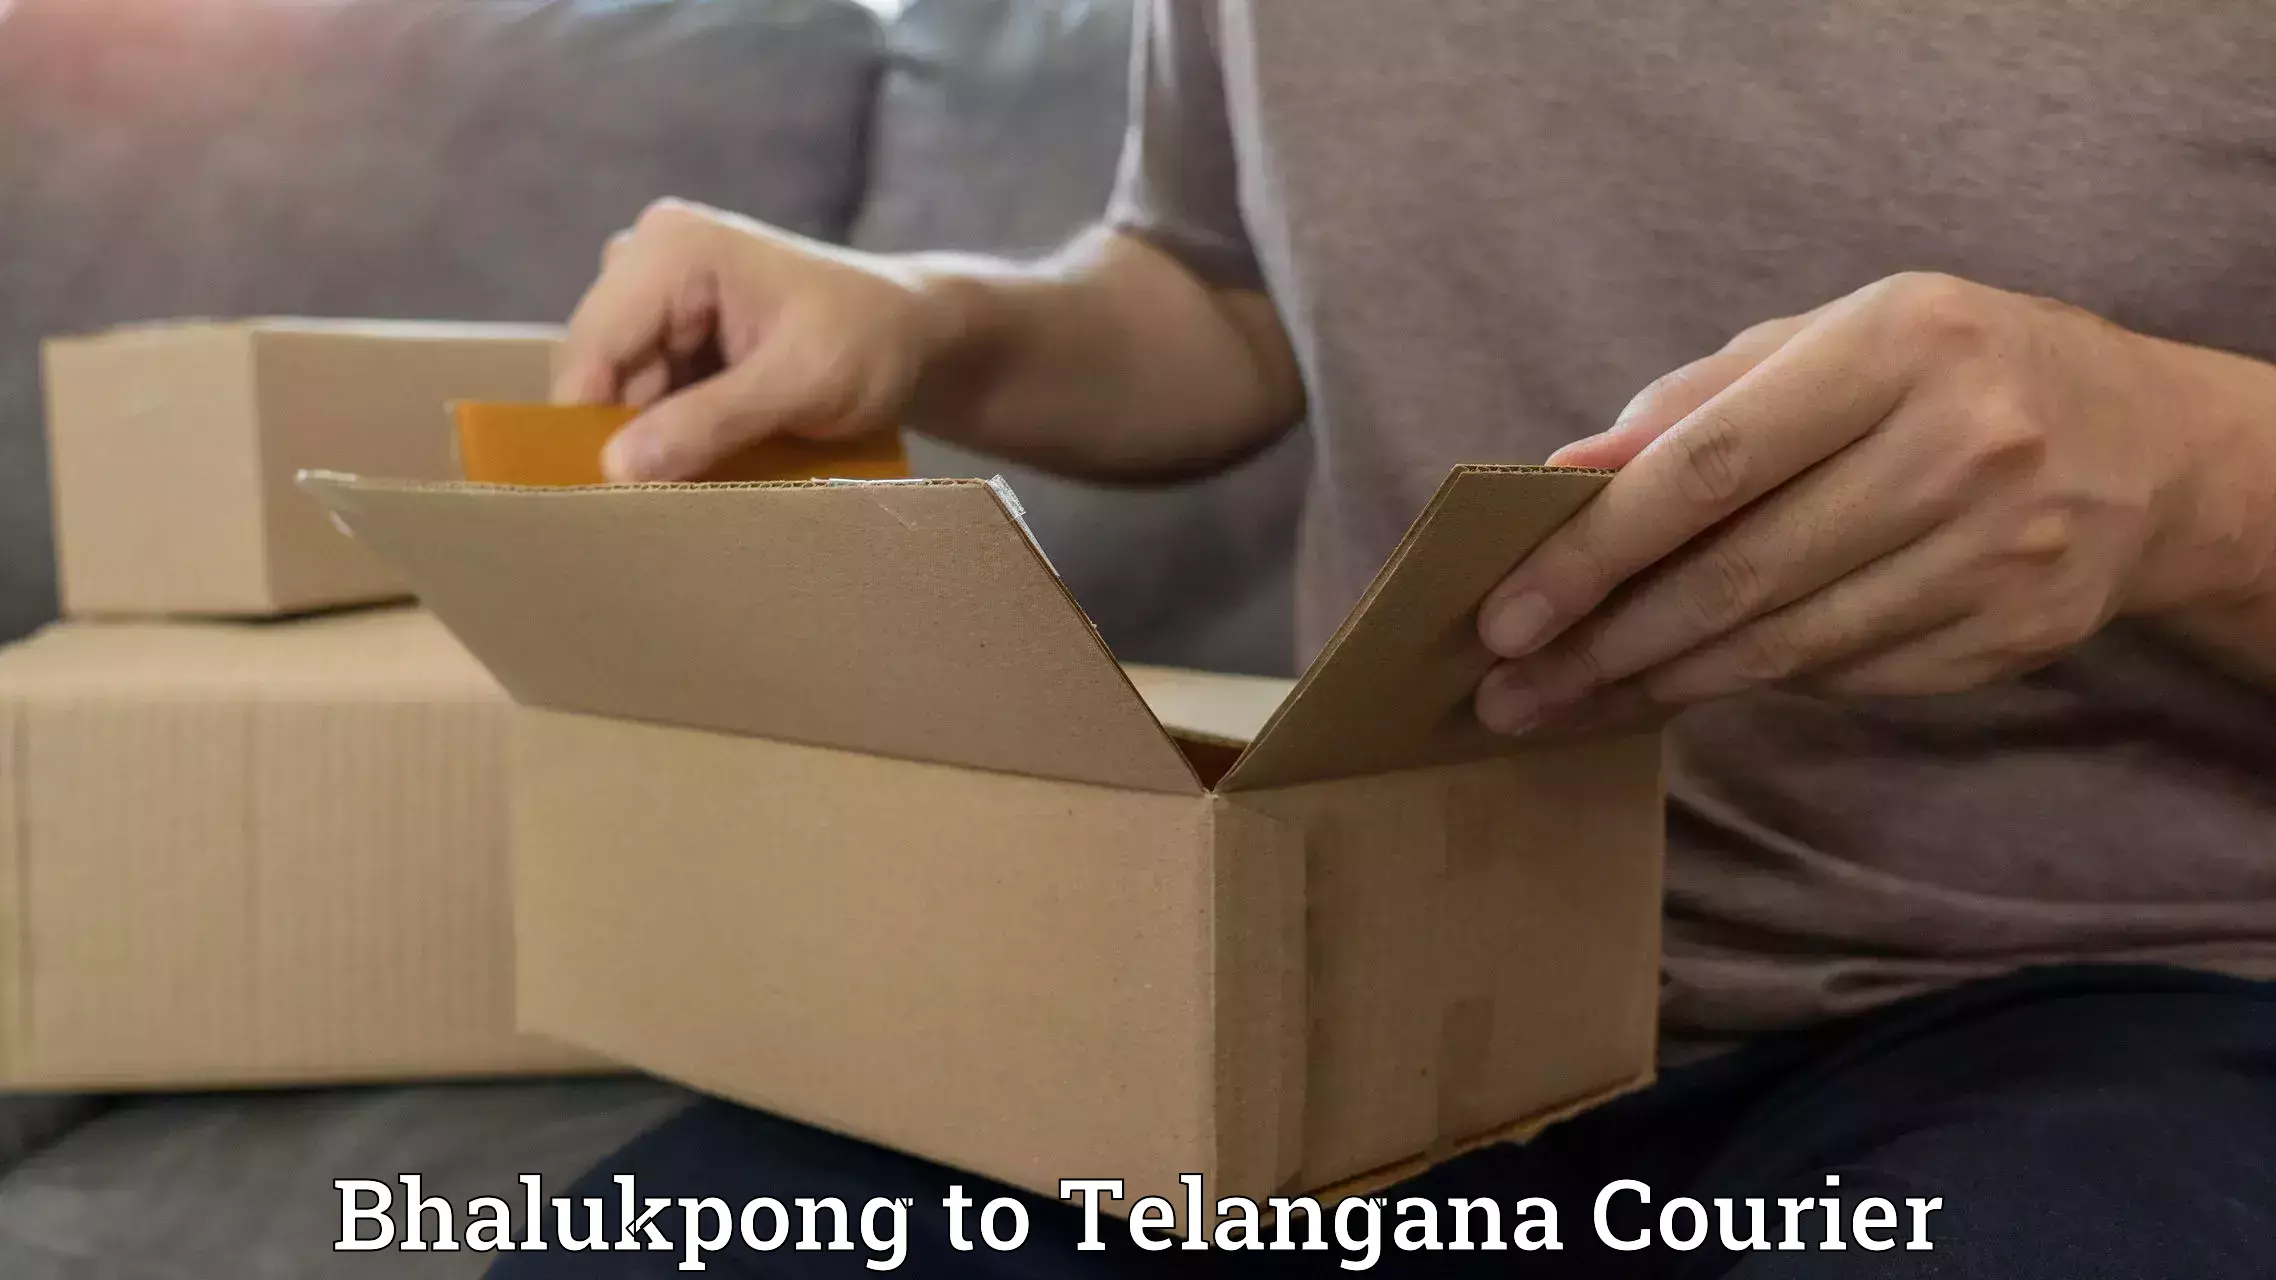 Courier service efficiency in Bhalukpong to Balanagar